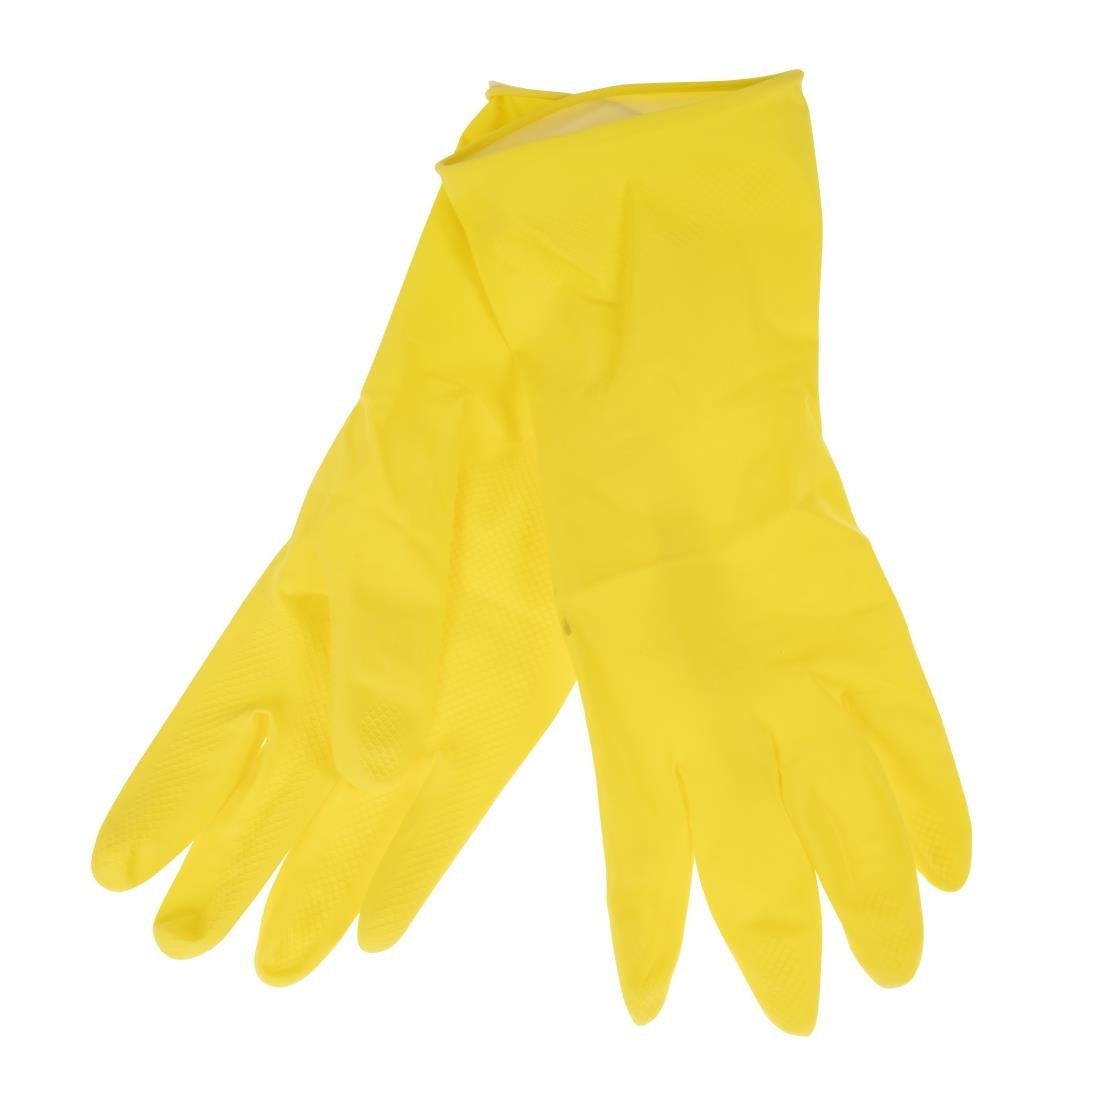 Jantex Household Glove Yellow Small JD Catering Equipment Solutions Ltd